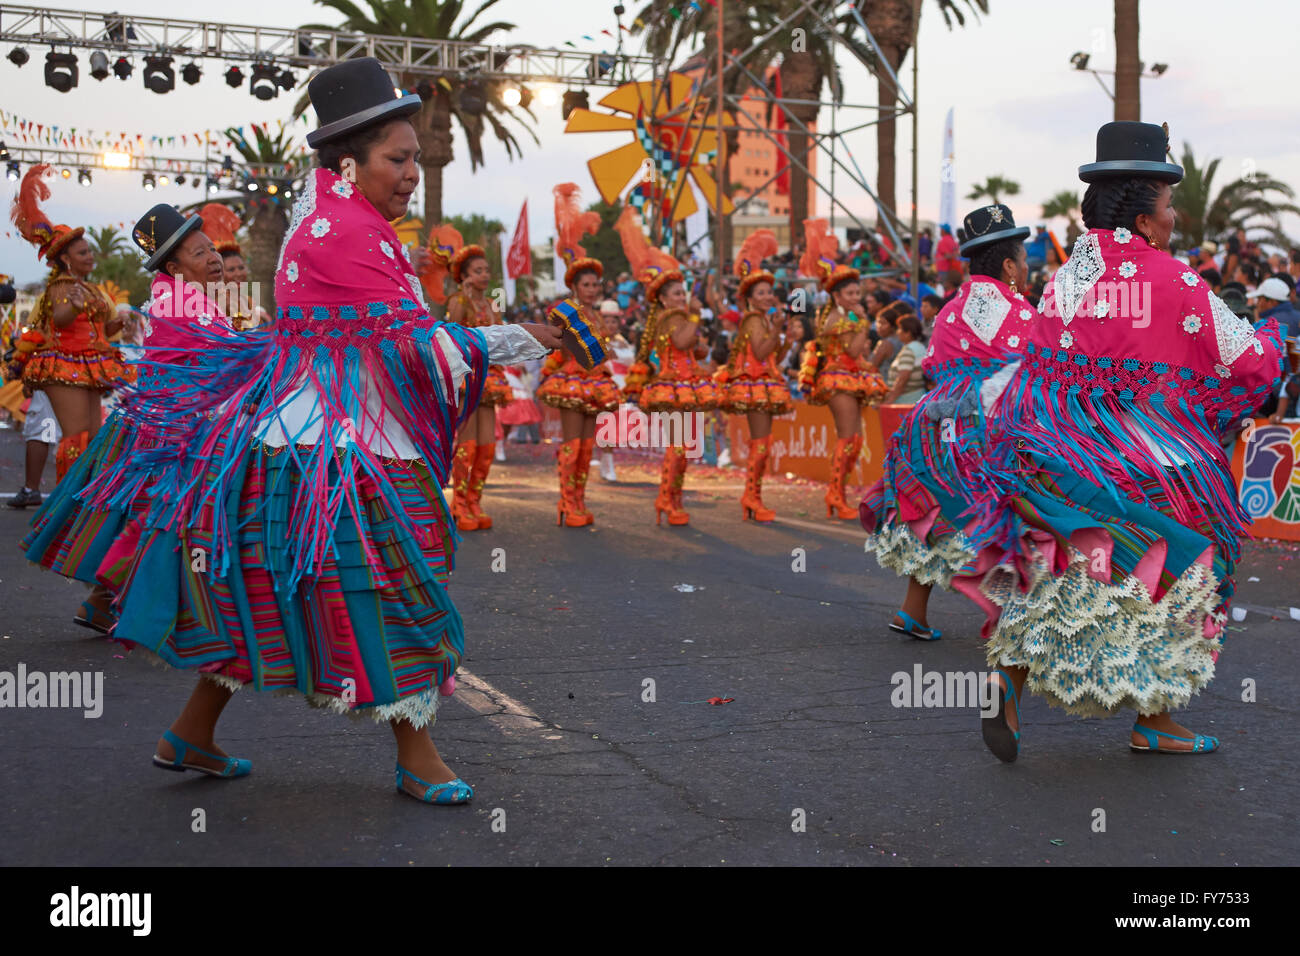 Morenada High Resolution Stock Photography and Images - Alamy